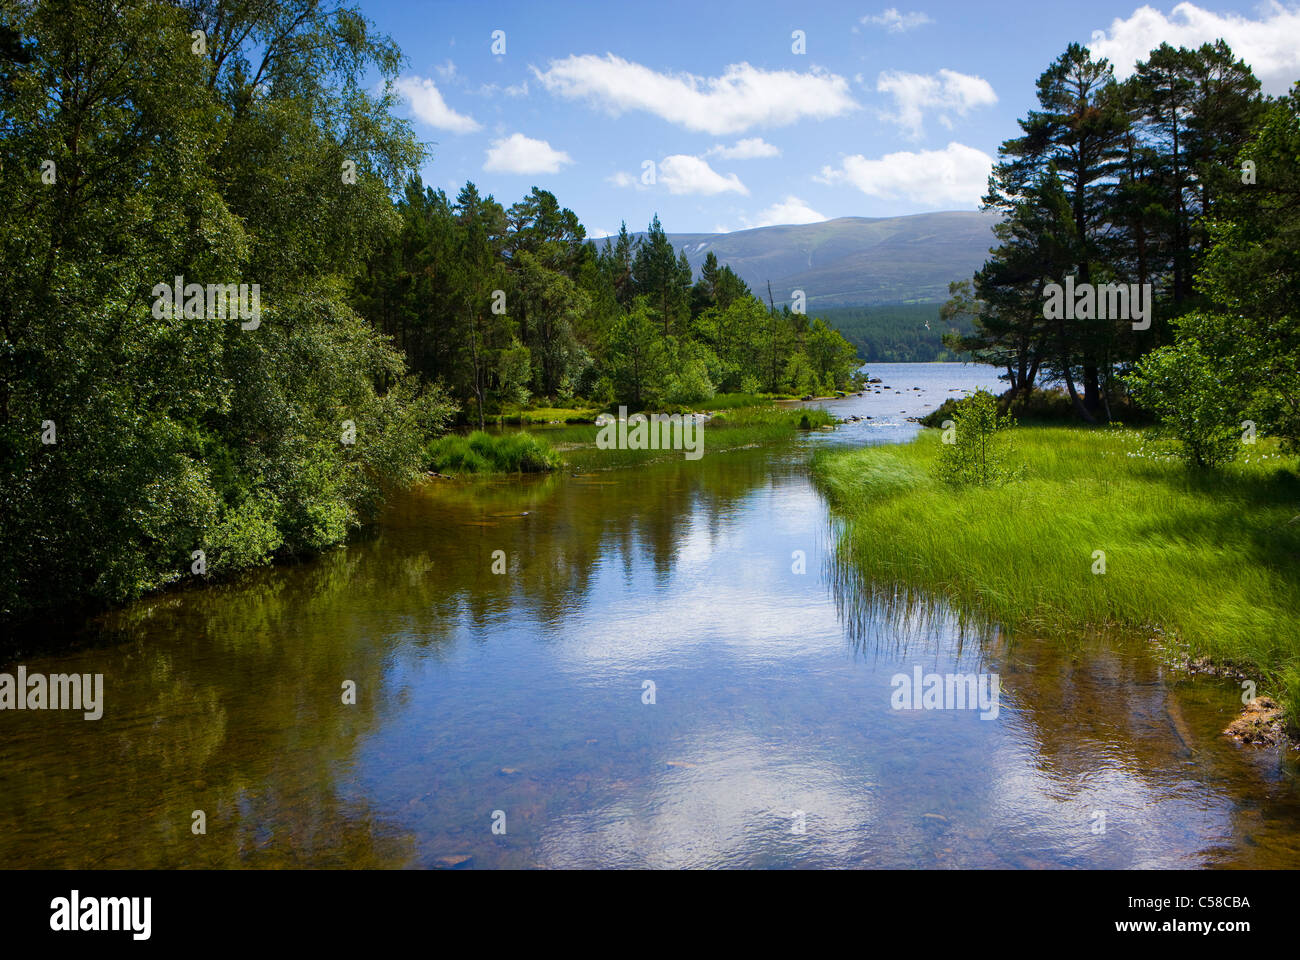 Loch Morlich, Great Britain, Scotland, Europe, sea, wood, forest, trees, lake shores, clouds Stock Photo